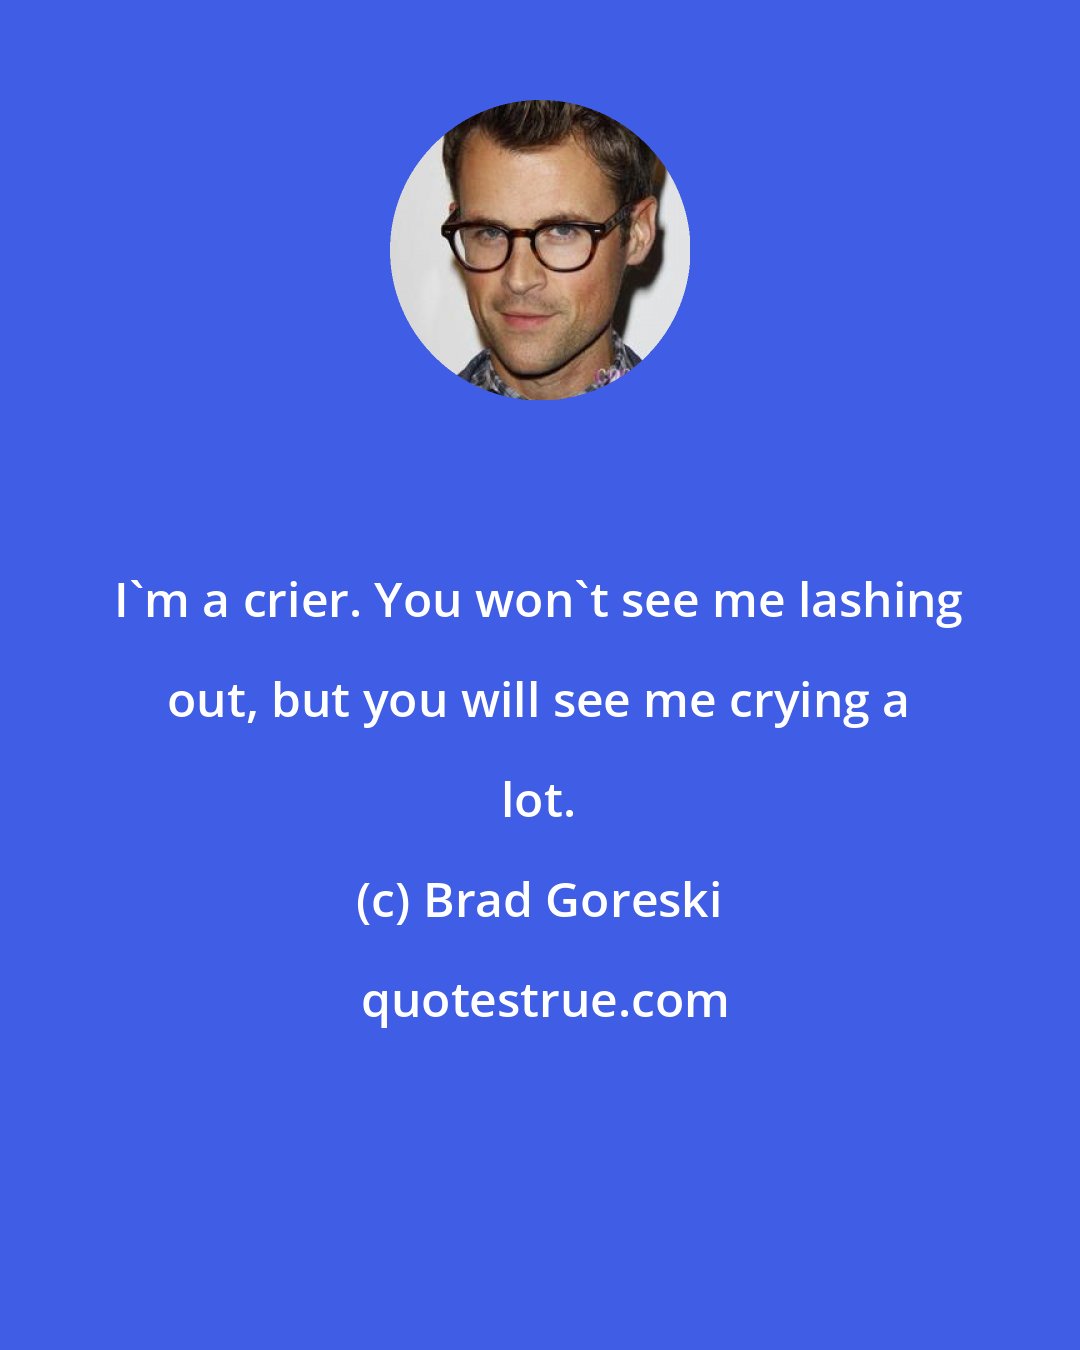 Brad Goreski: I'm a crier. You won't see me lashing out, but you will see me crying a lot.